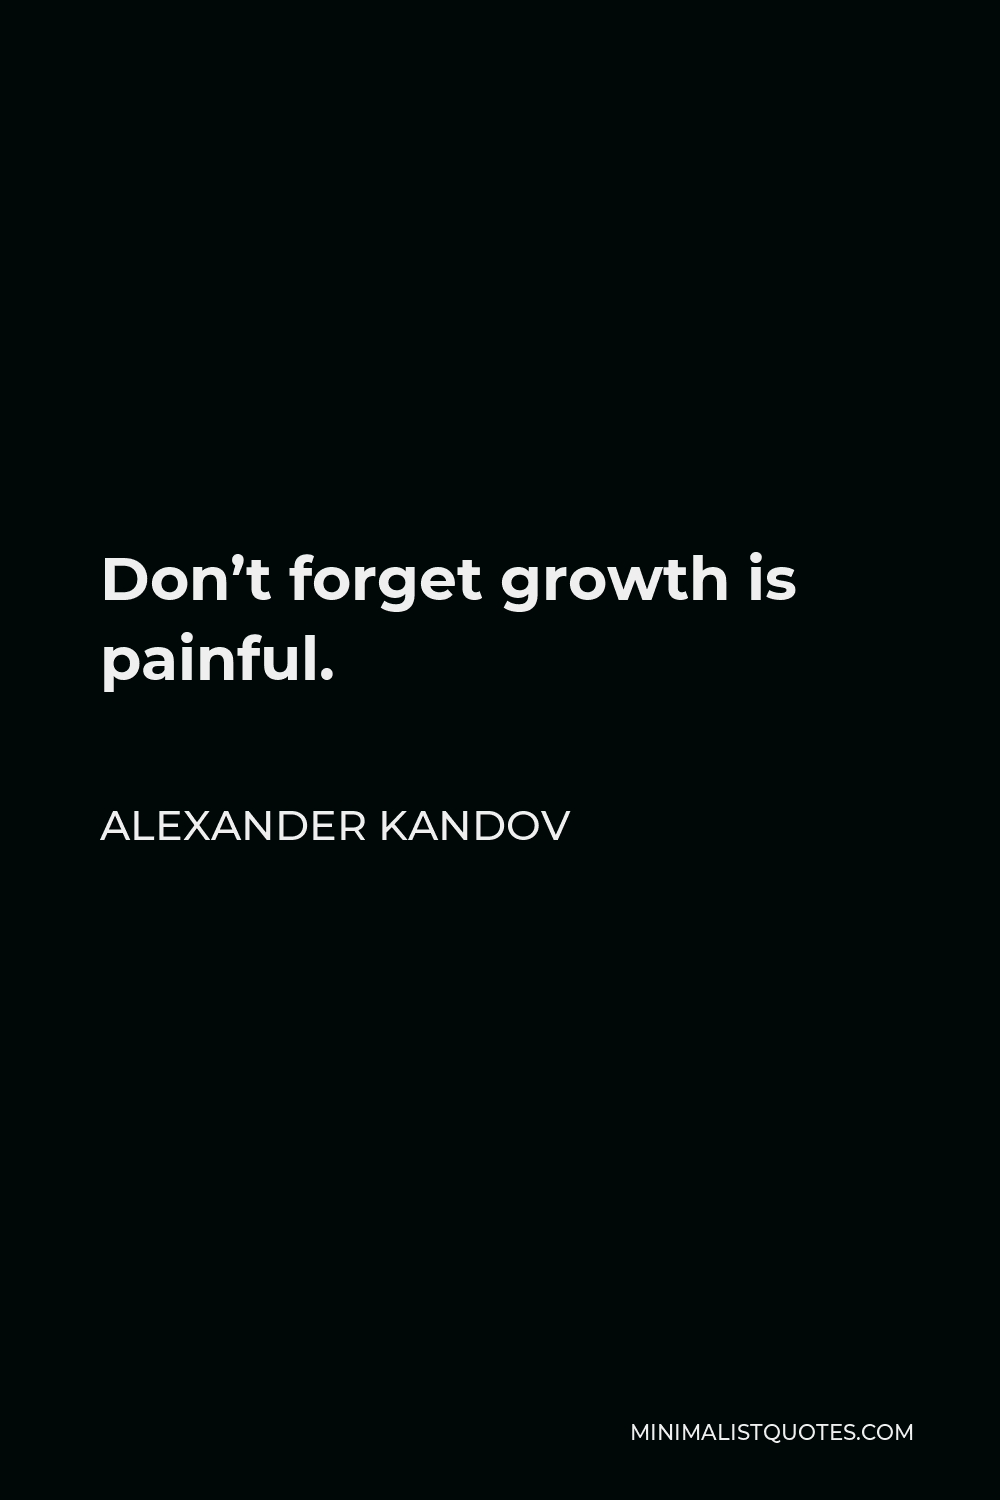 Alexander Kandov Quote - Don’t forget growth is painful.